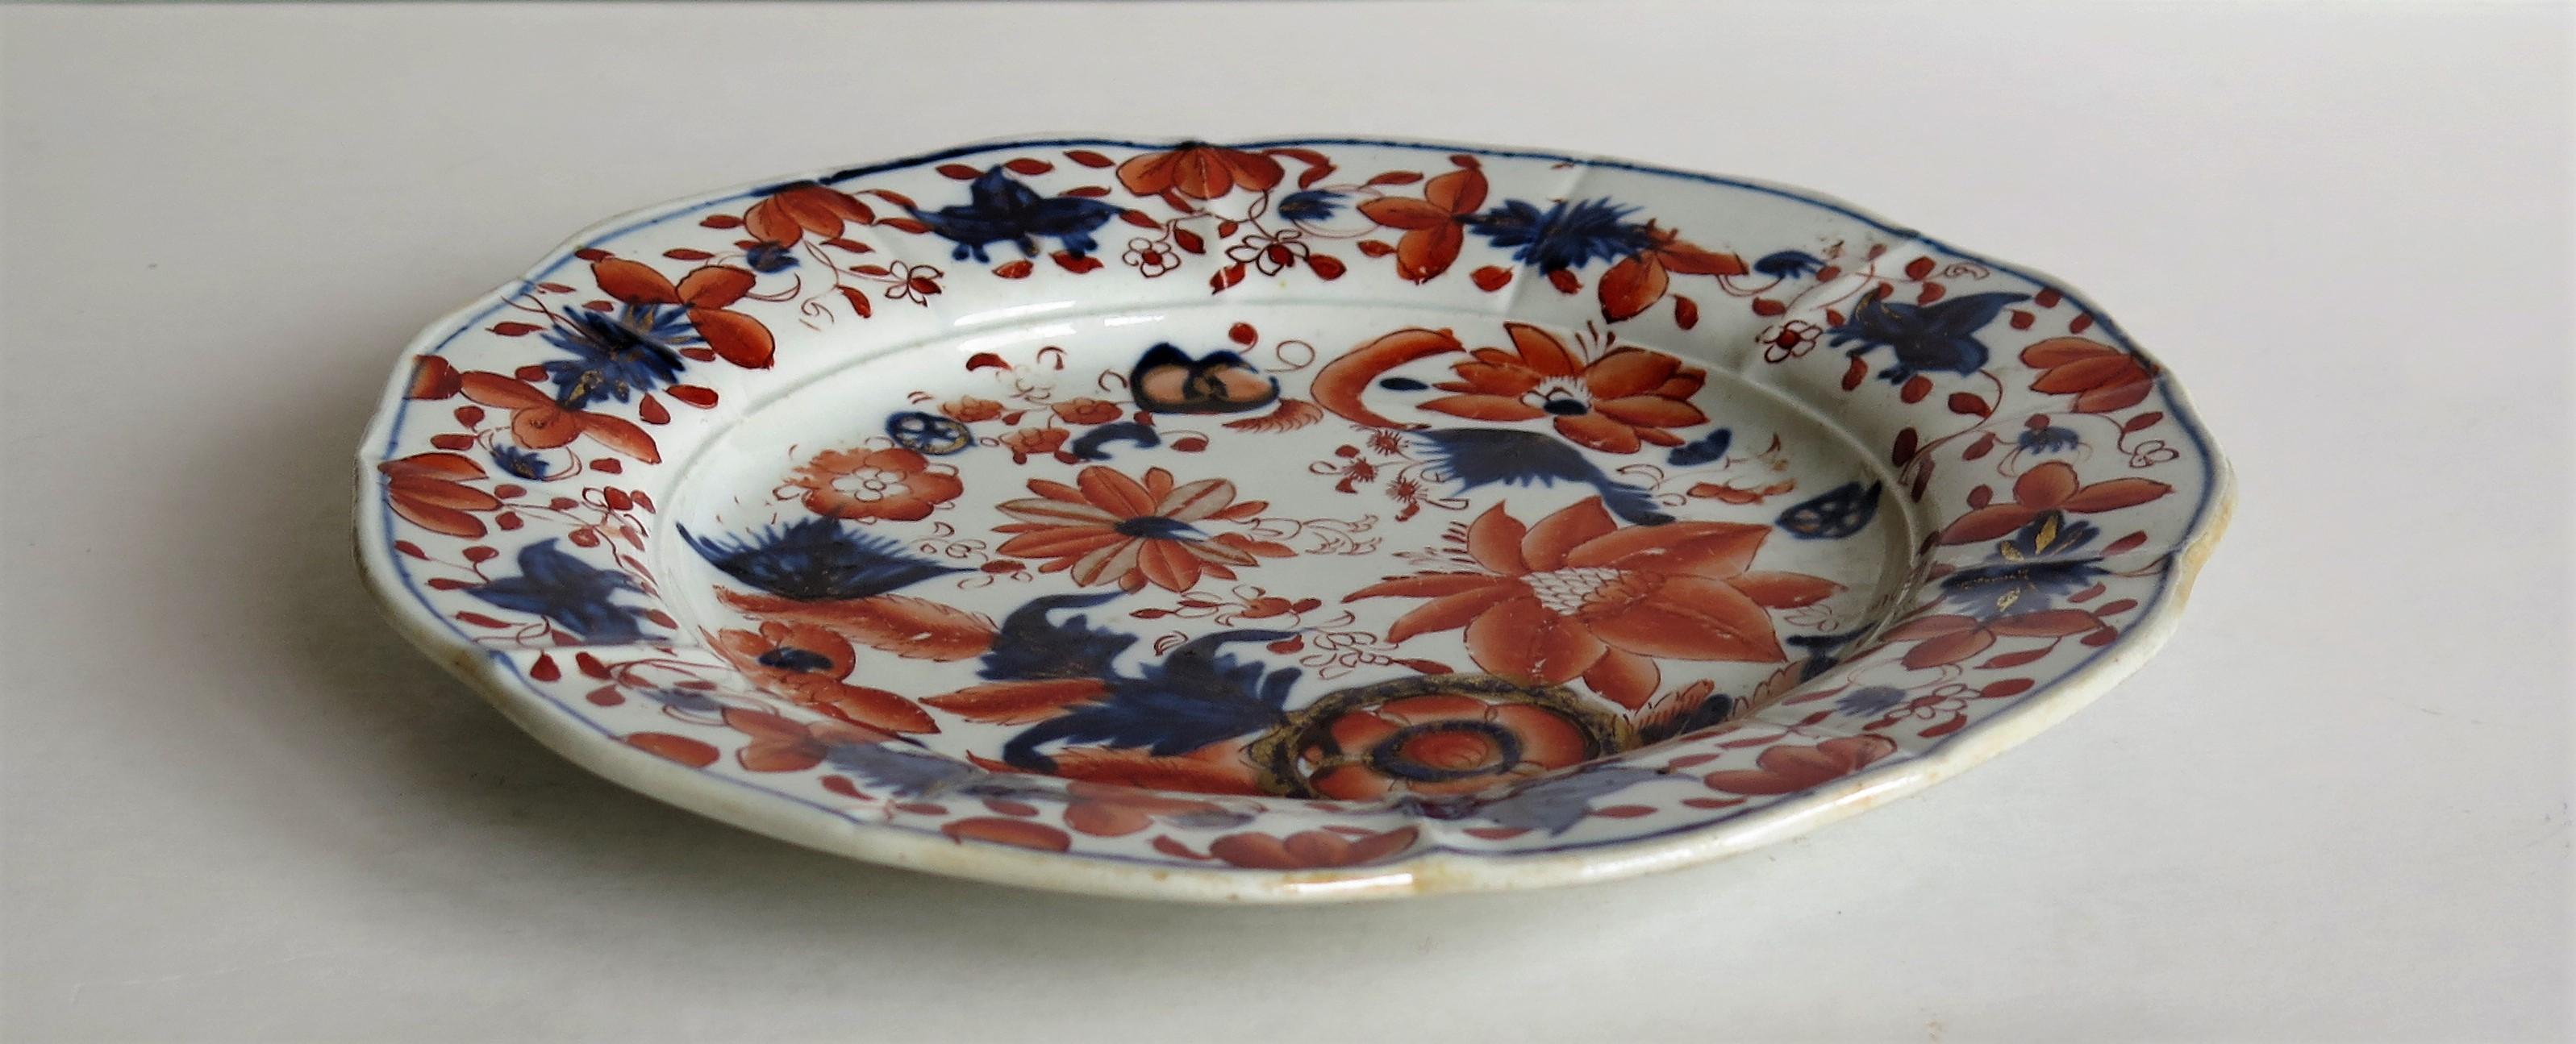 Early Mason's Ironstone Dish or Plate Flowers and Wheels Rare Pattern Circa 1815 1